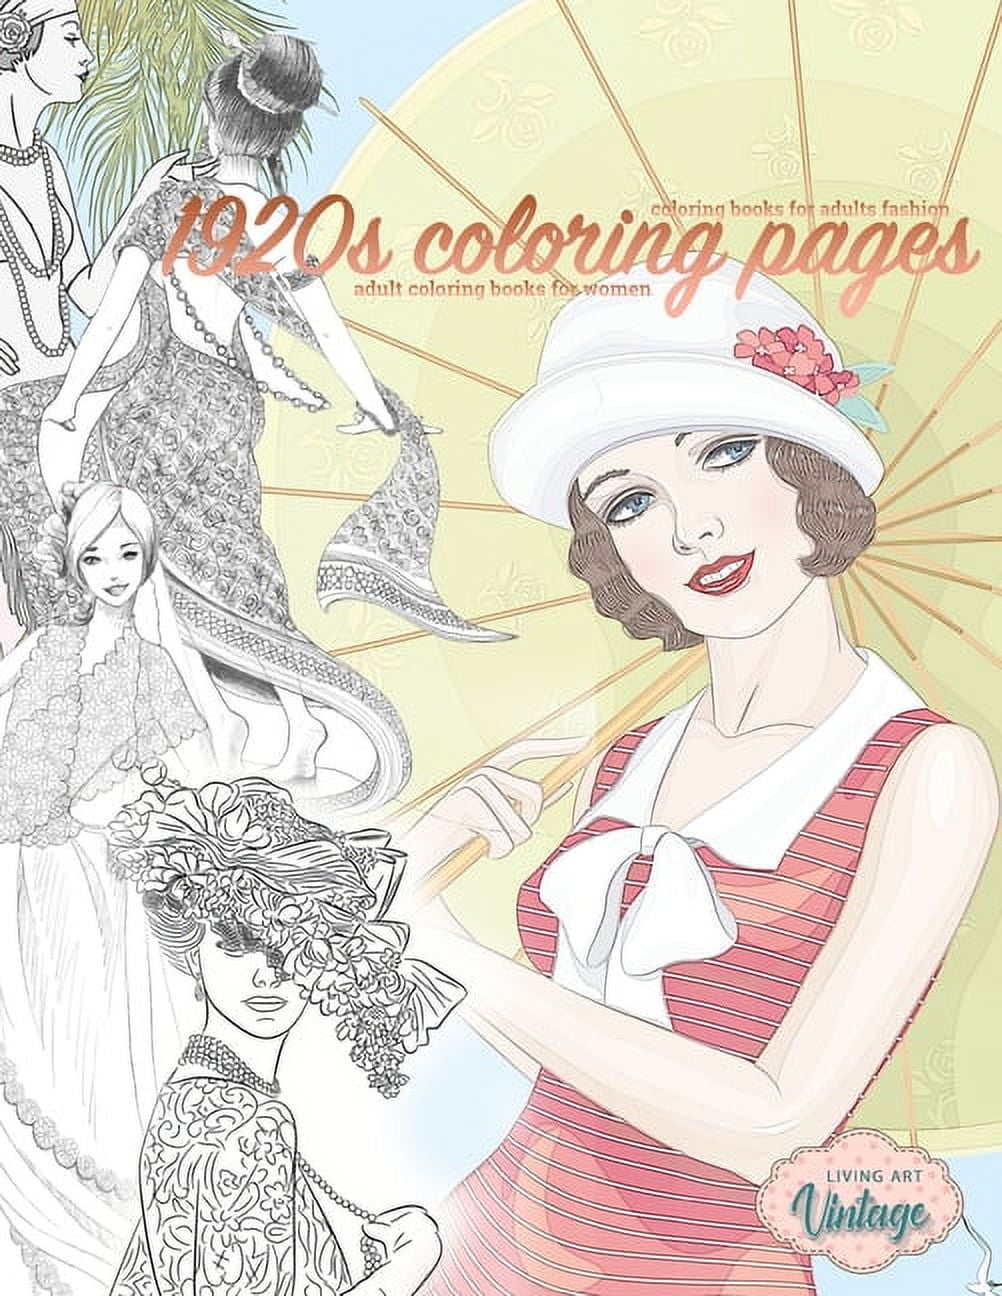 1920s coloring pages, coloring books for adults fashion' adult coloring  books for women: grayscale coloring books for beginners, vintage coloring  book (Paperback)